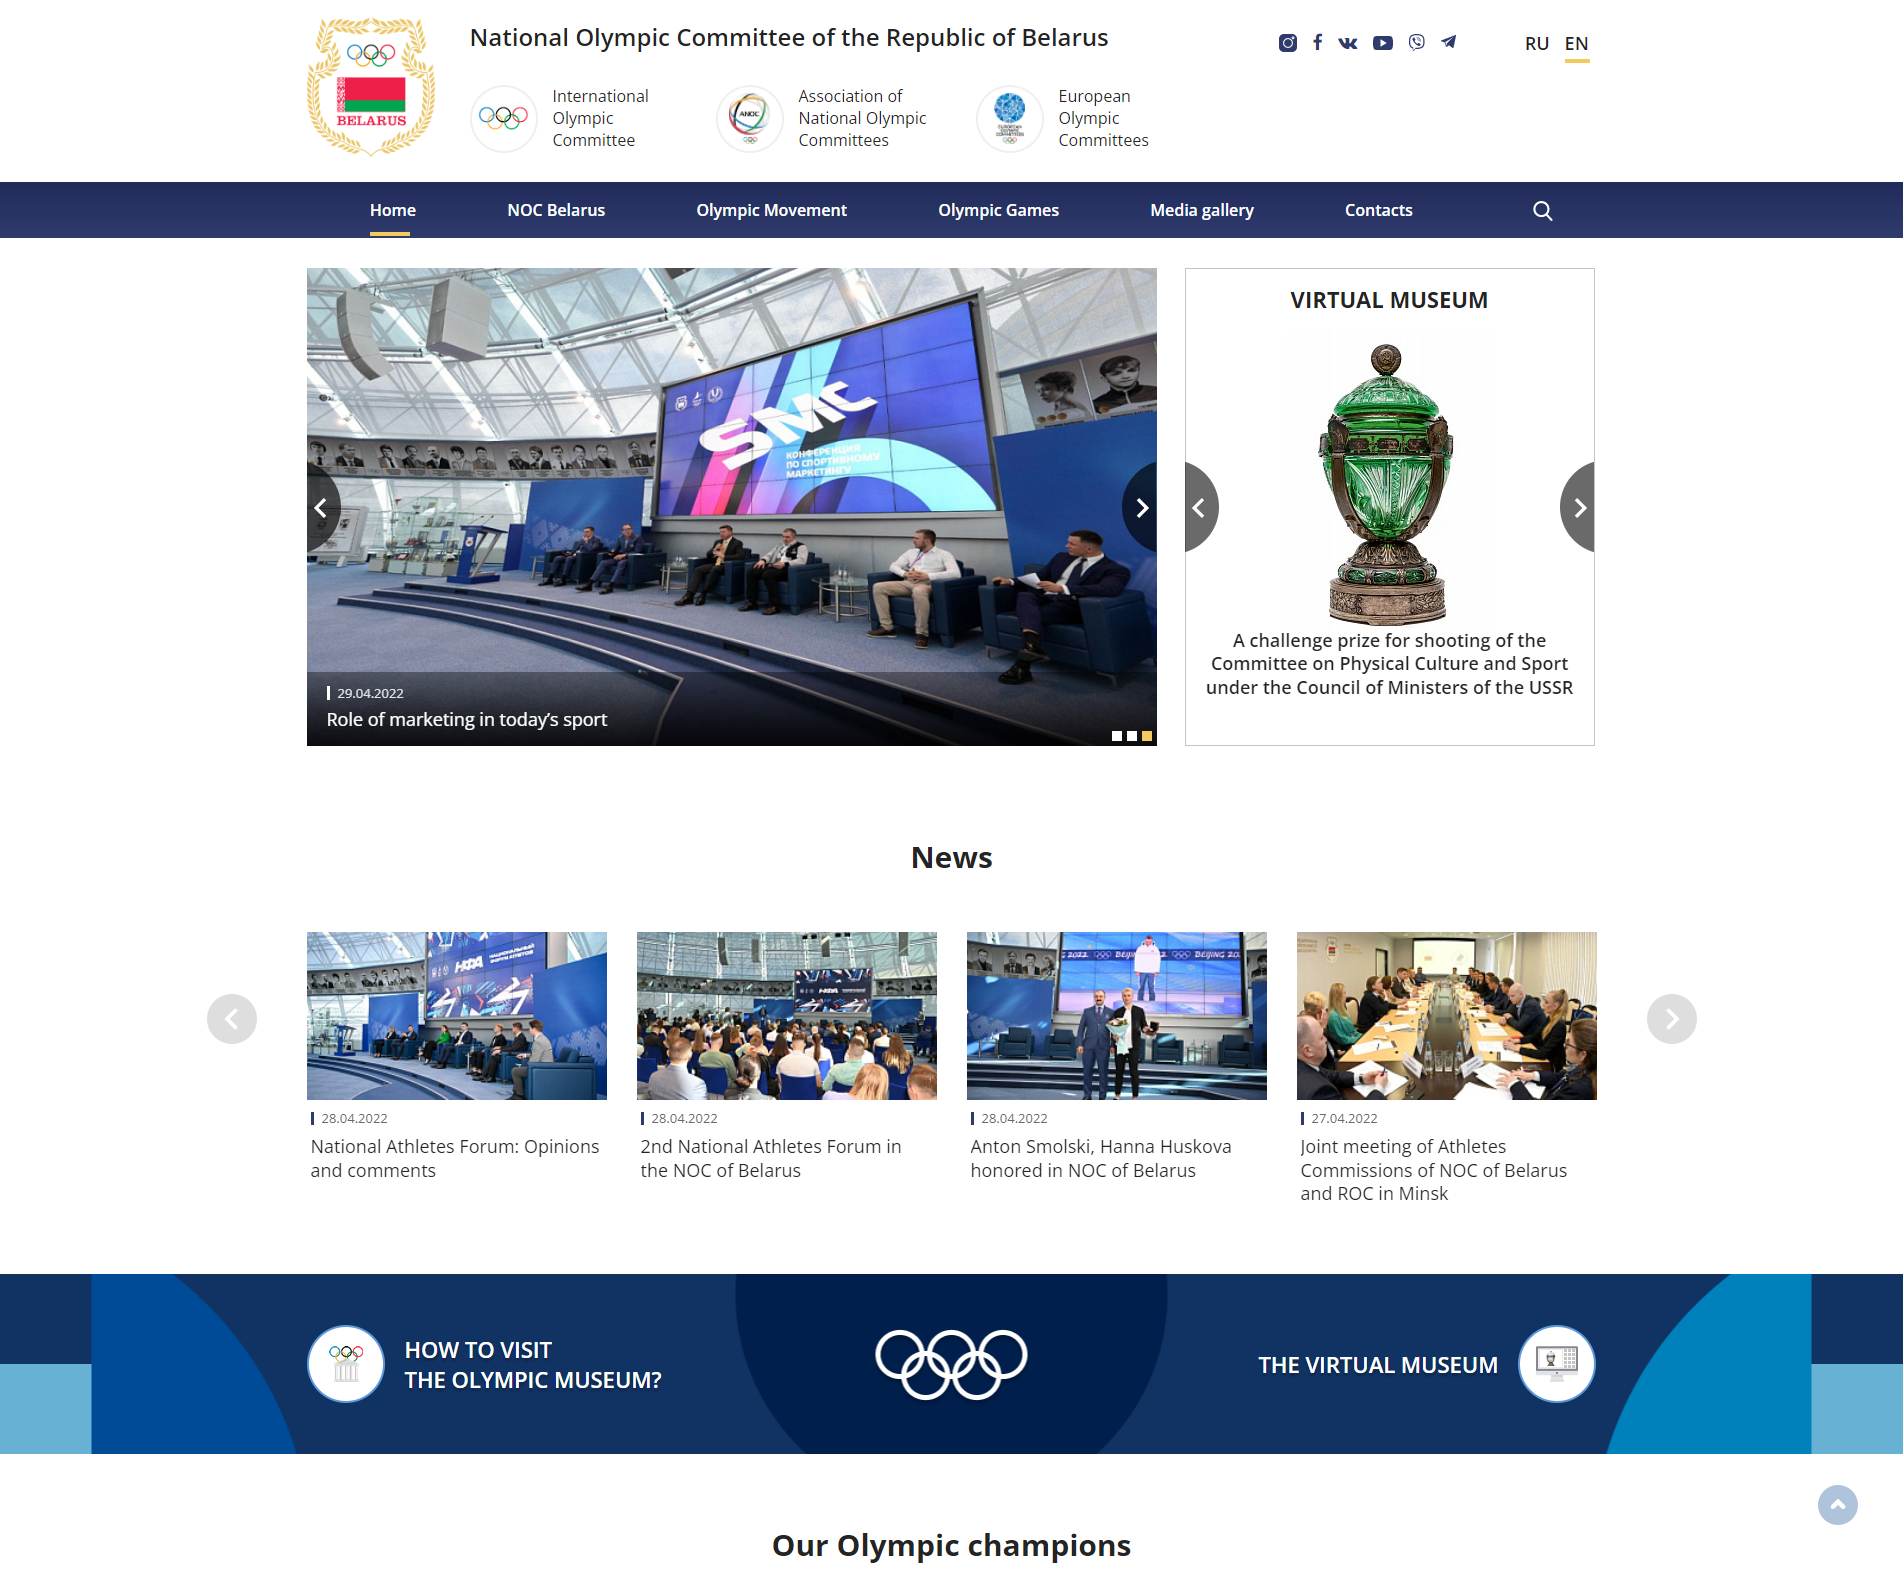 Website of the National Olympic Committee of the Republic of Belarus – noc.by